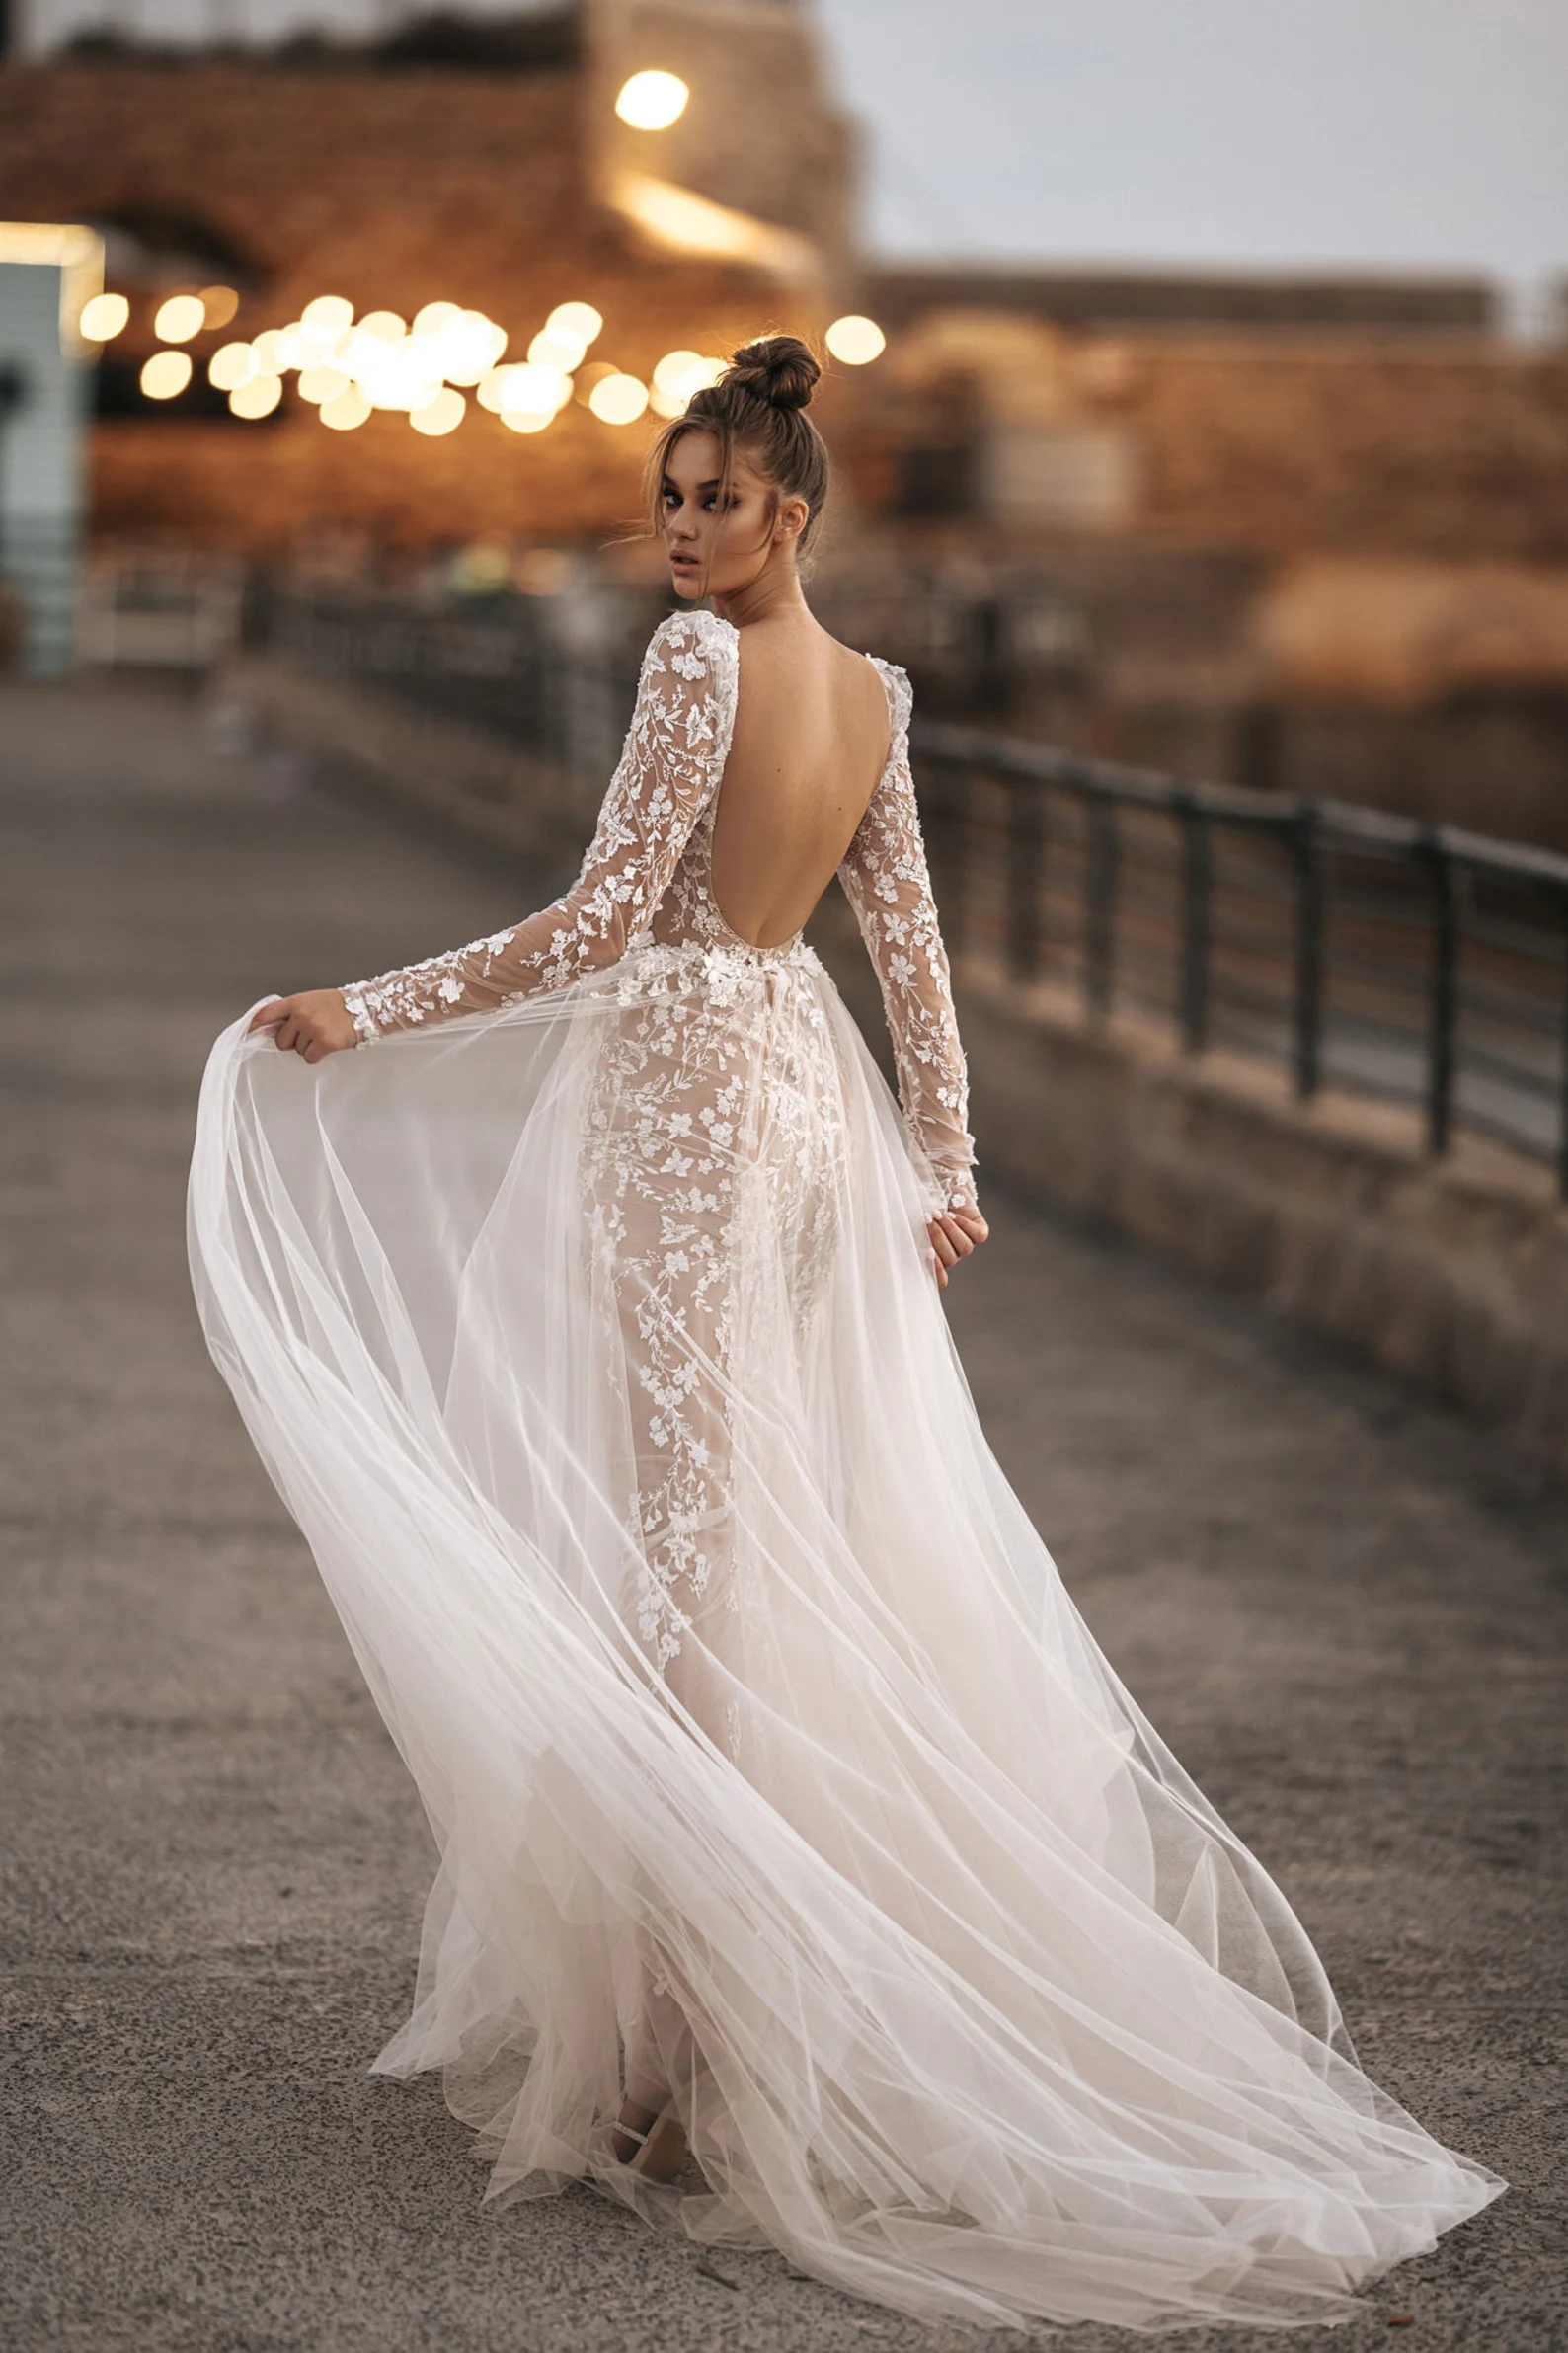 Long sleeves gown with the sheer overskirt and front bow